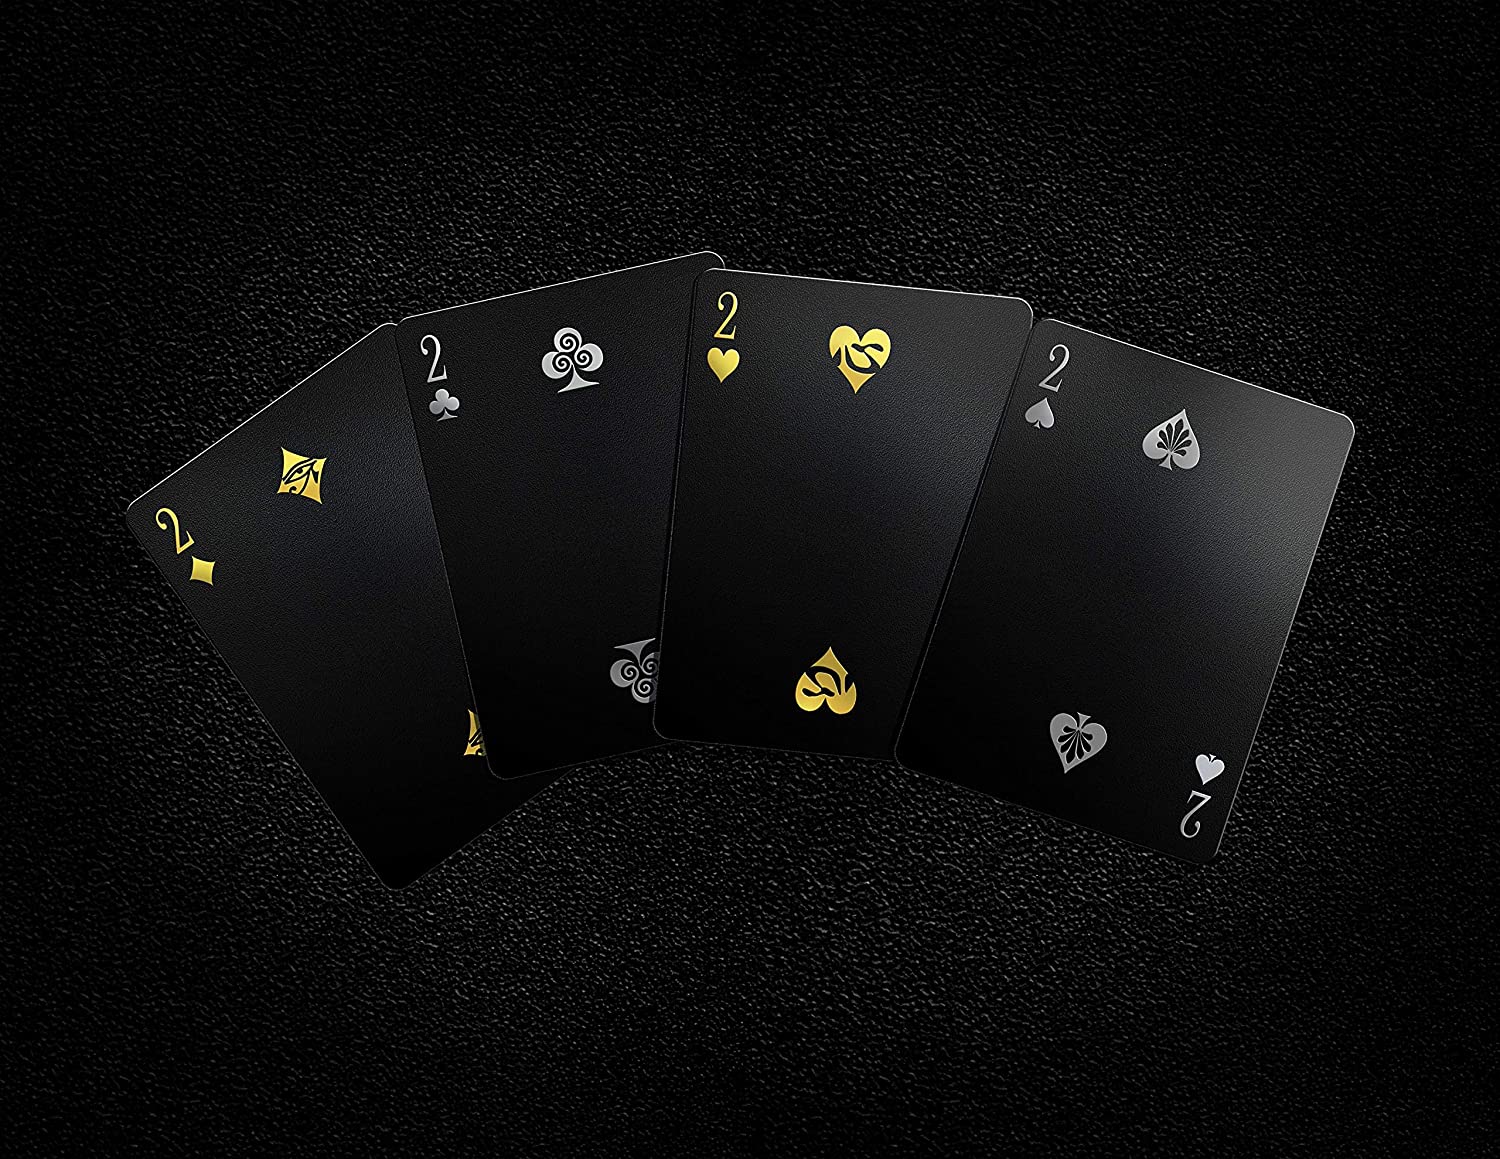 Each poker variant requires adapt playing style